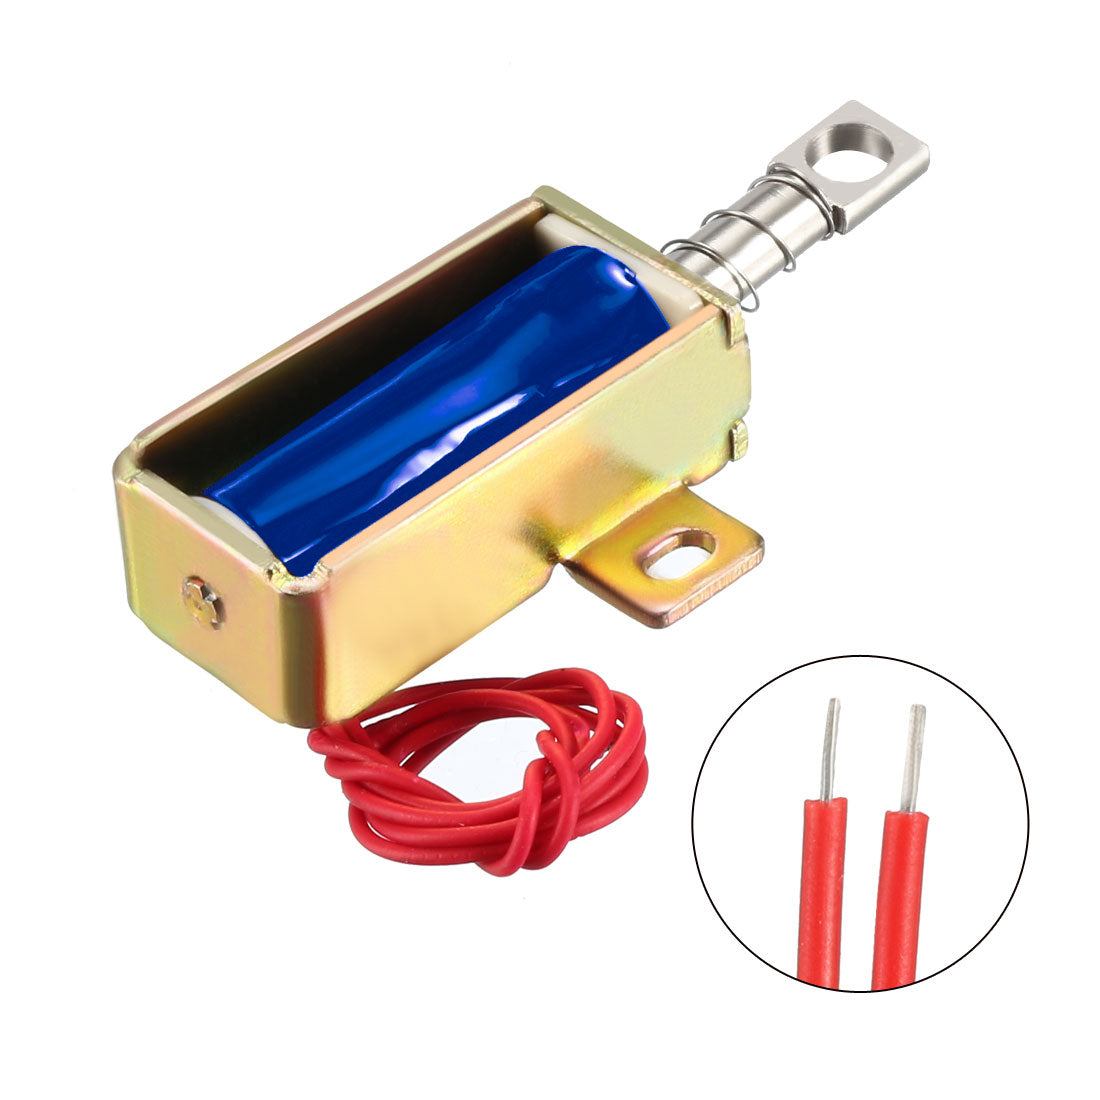 uxcell Uxcell DC 12V 2A 5mm Mini Electromagnetic Solenoid Lock Pull Type for Electirc Door Lock